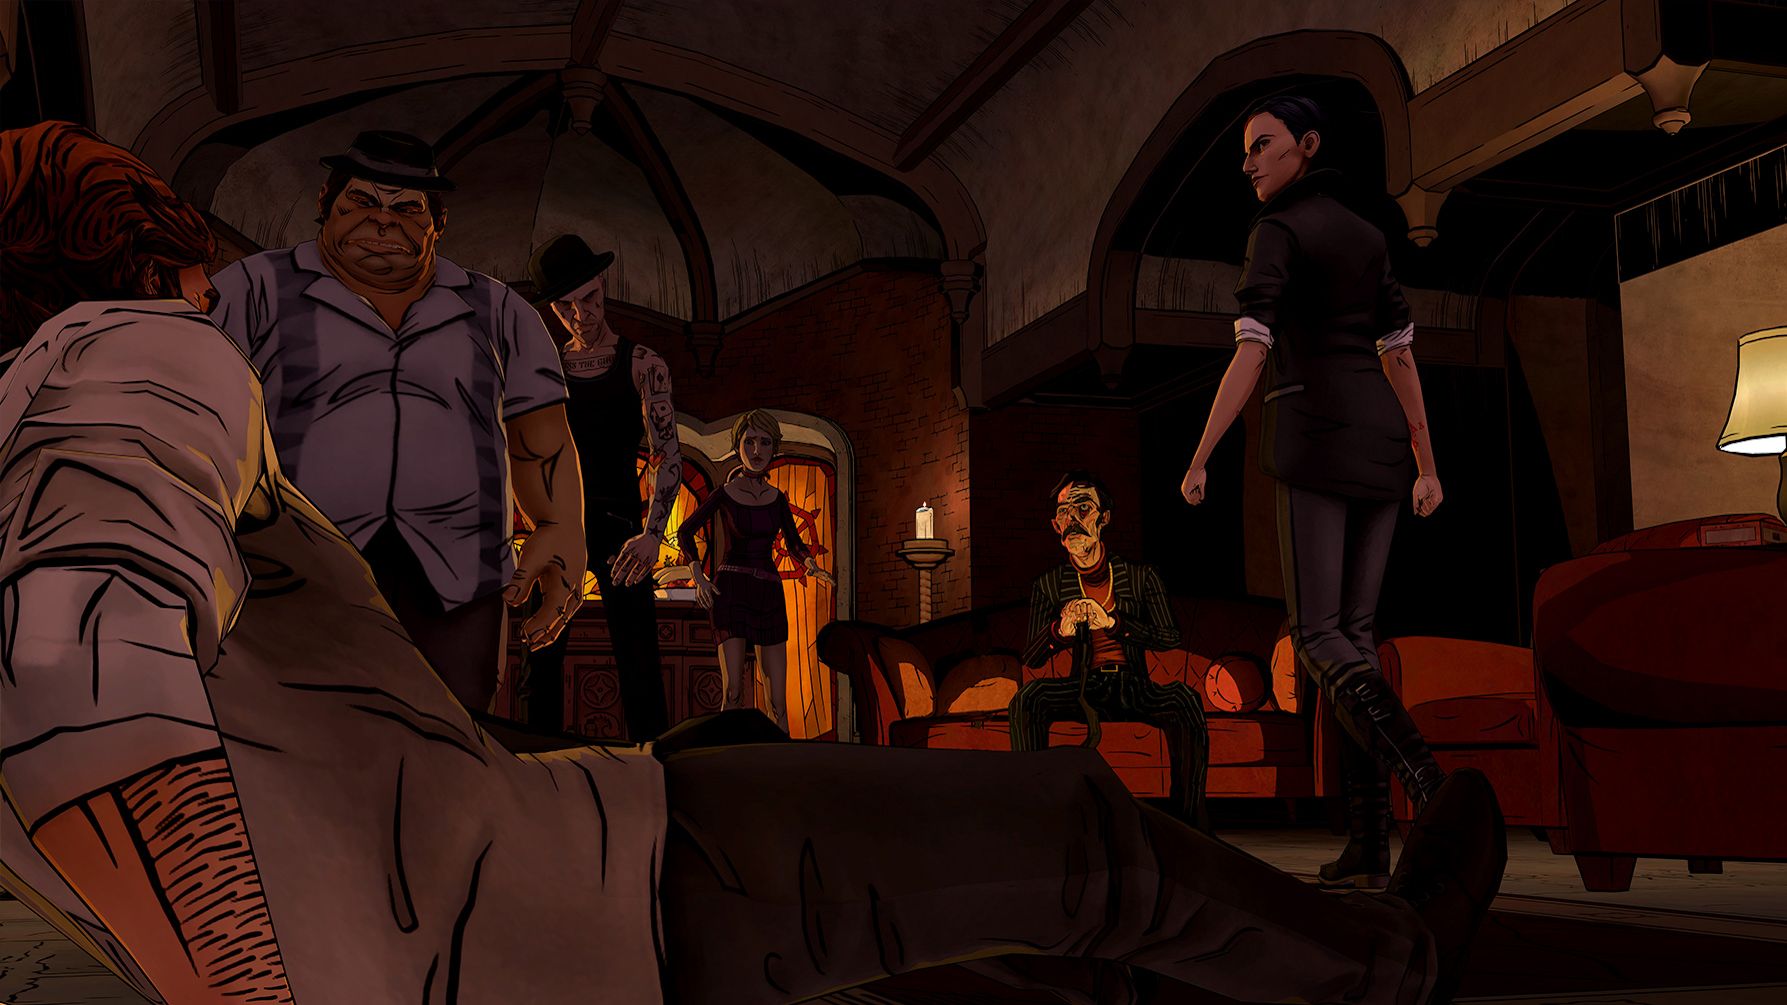 the wolf among us game cast